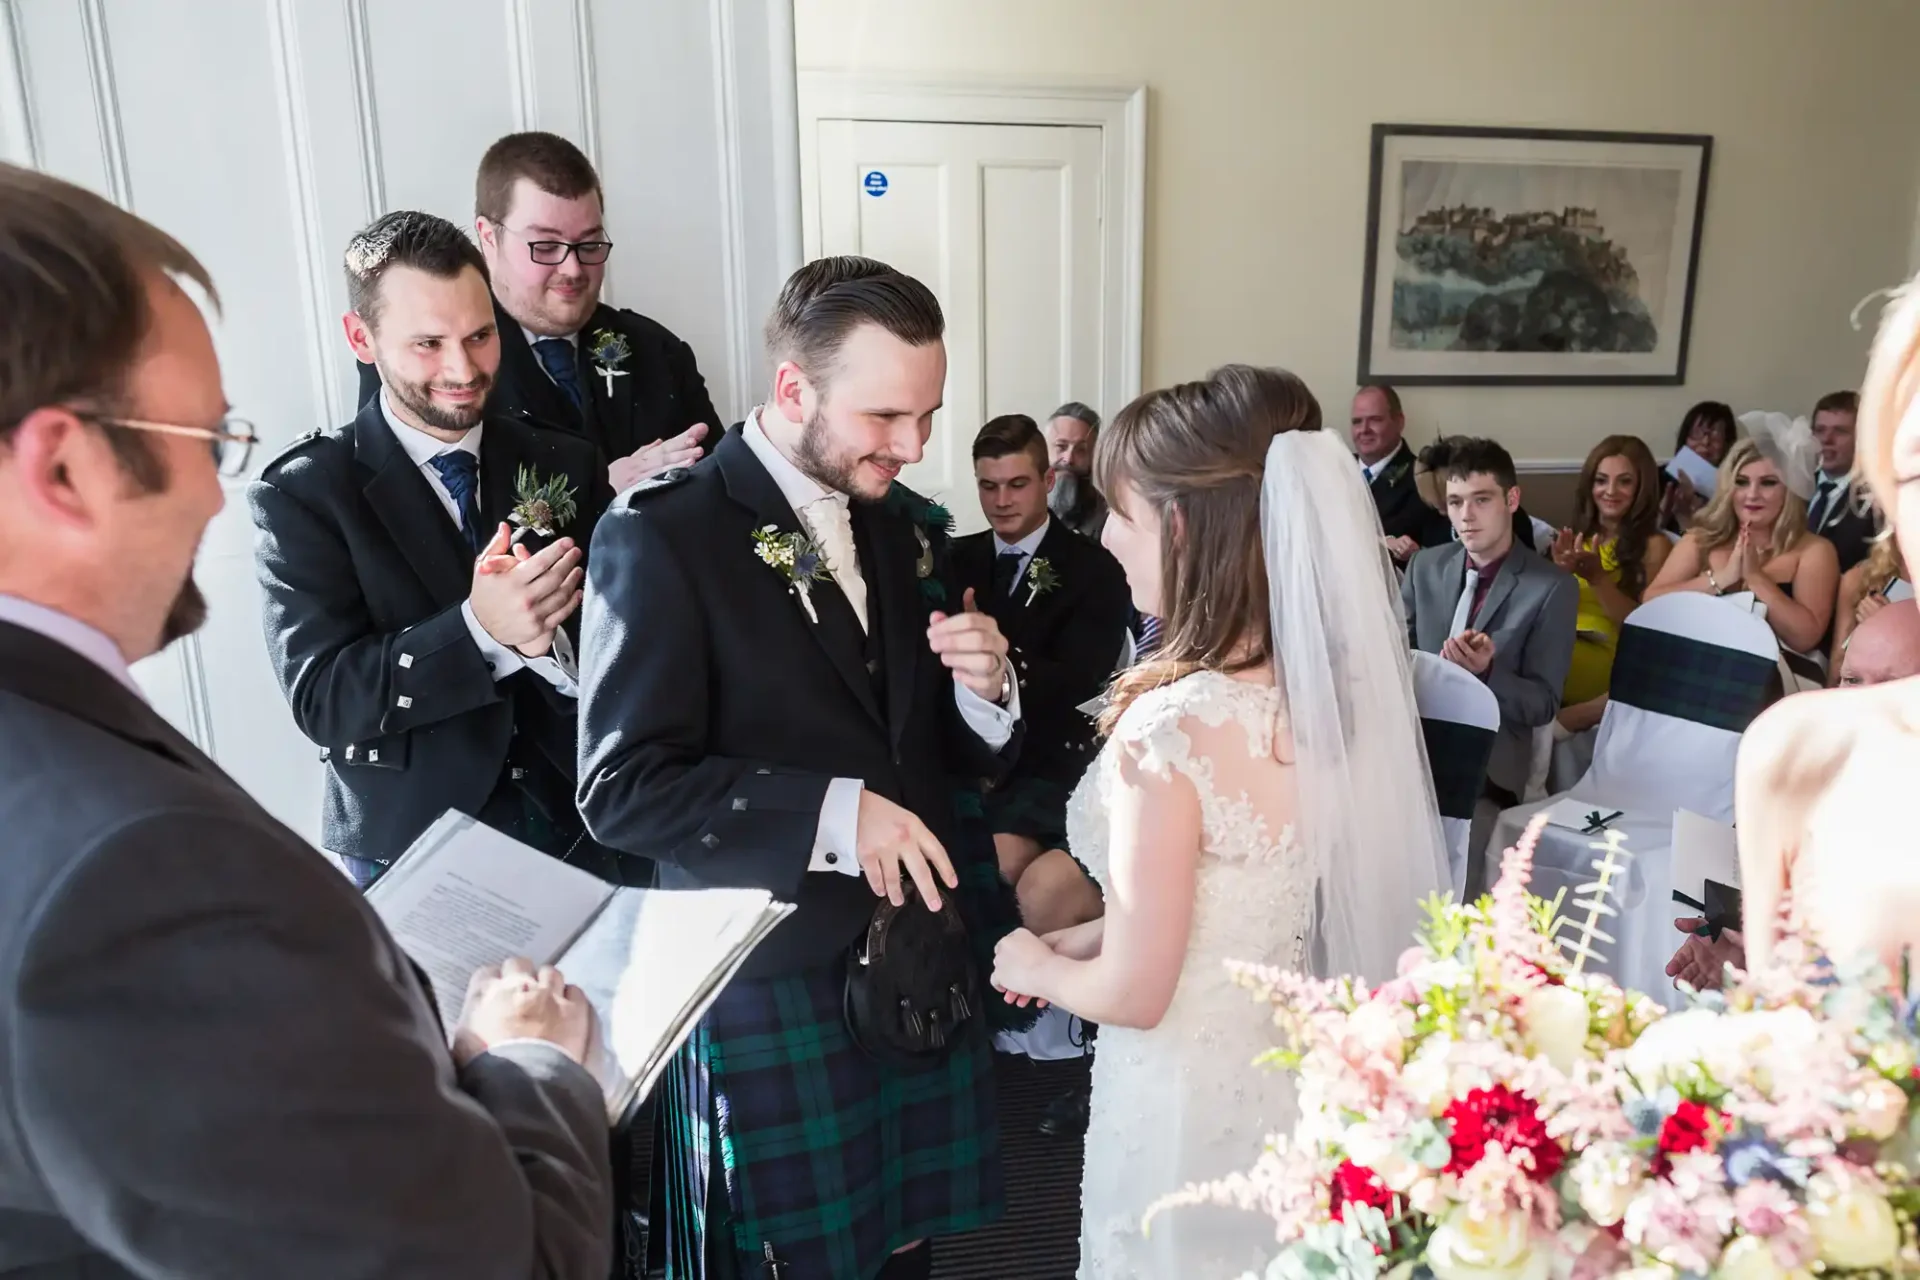 A bride and groom exchanging wedding rings in a crowded room, groom wearing a kilt, with smiling guests looking on.